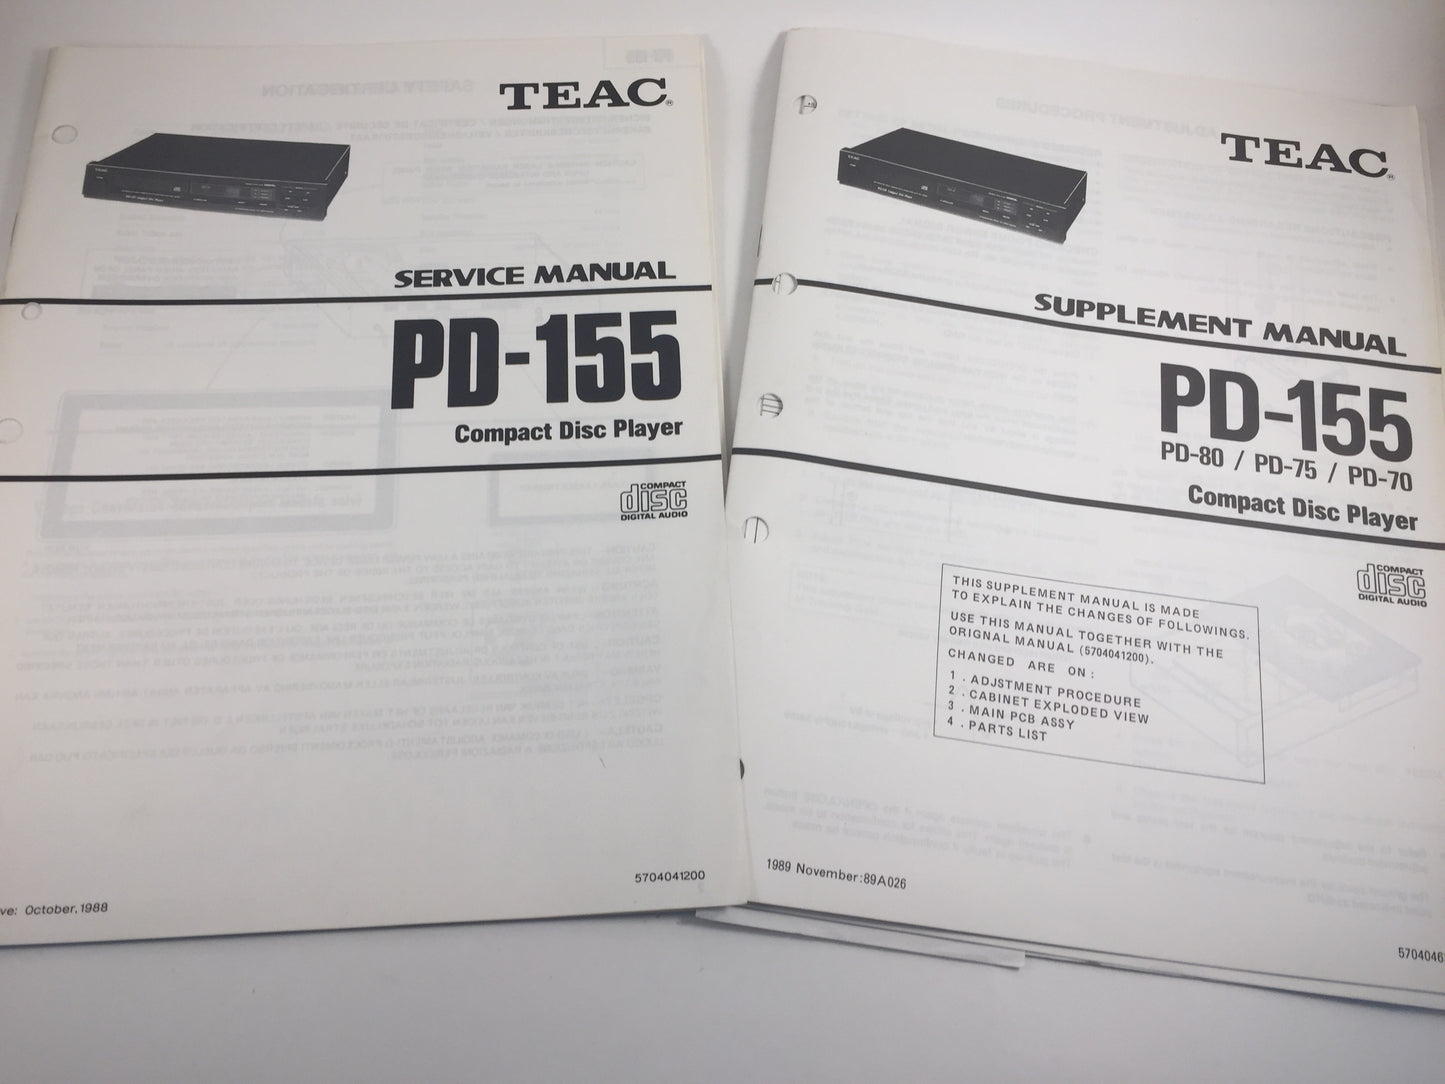 TEAC PD-155 PD-80/PD-75/PD-70 Compact Disc Player Service-Supplement Manual